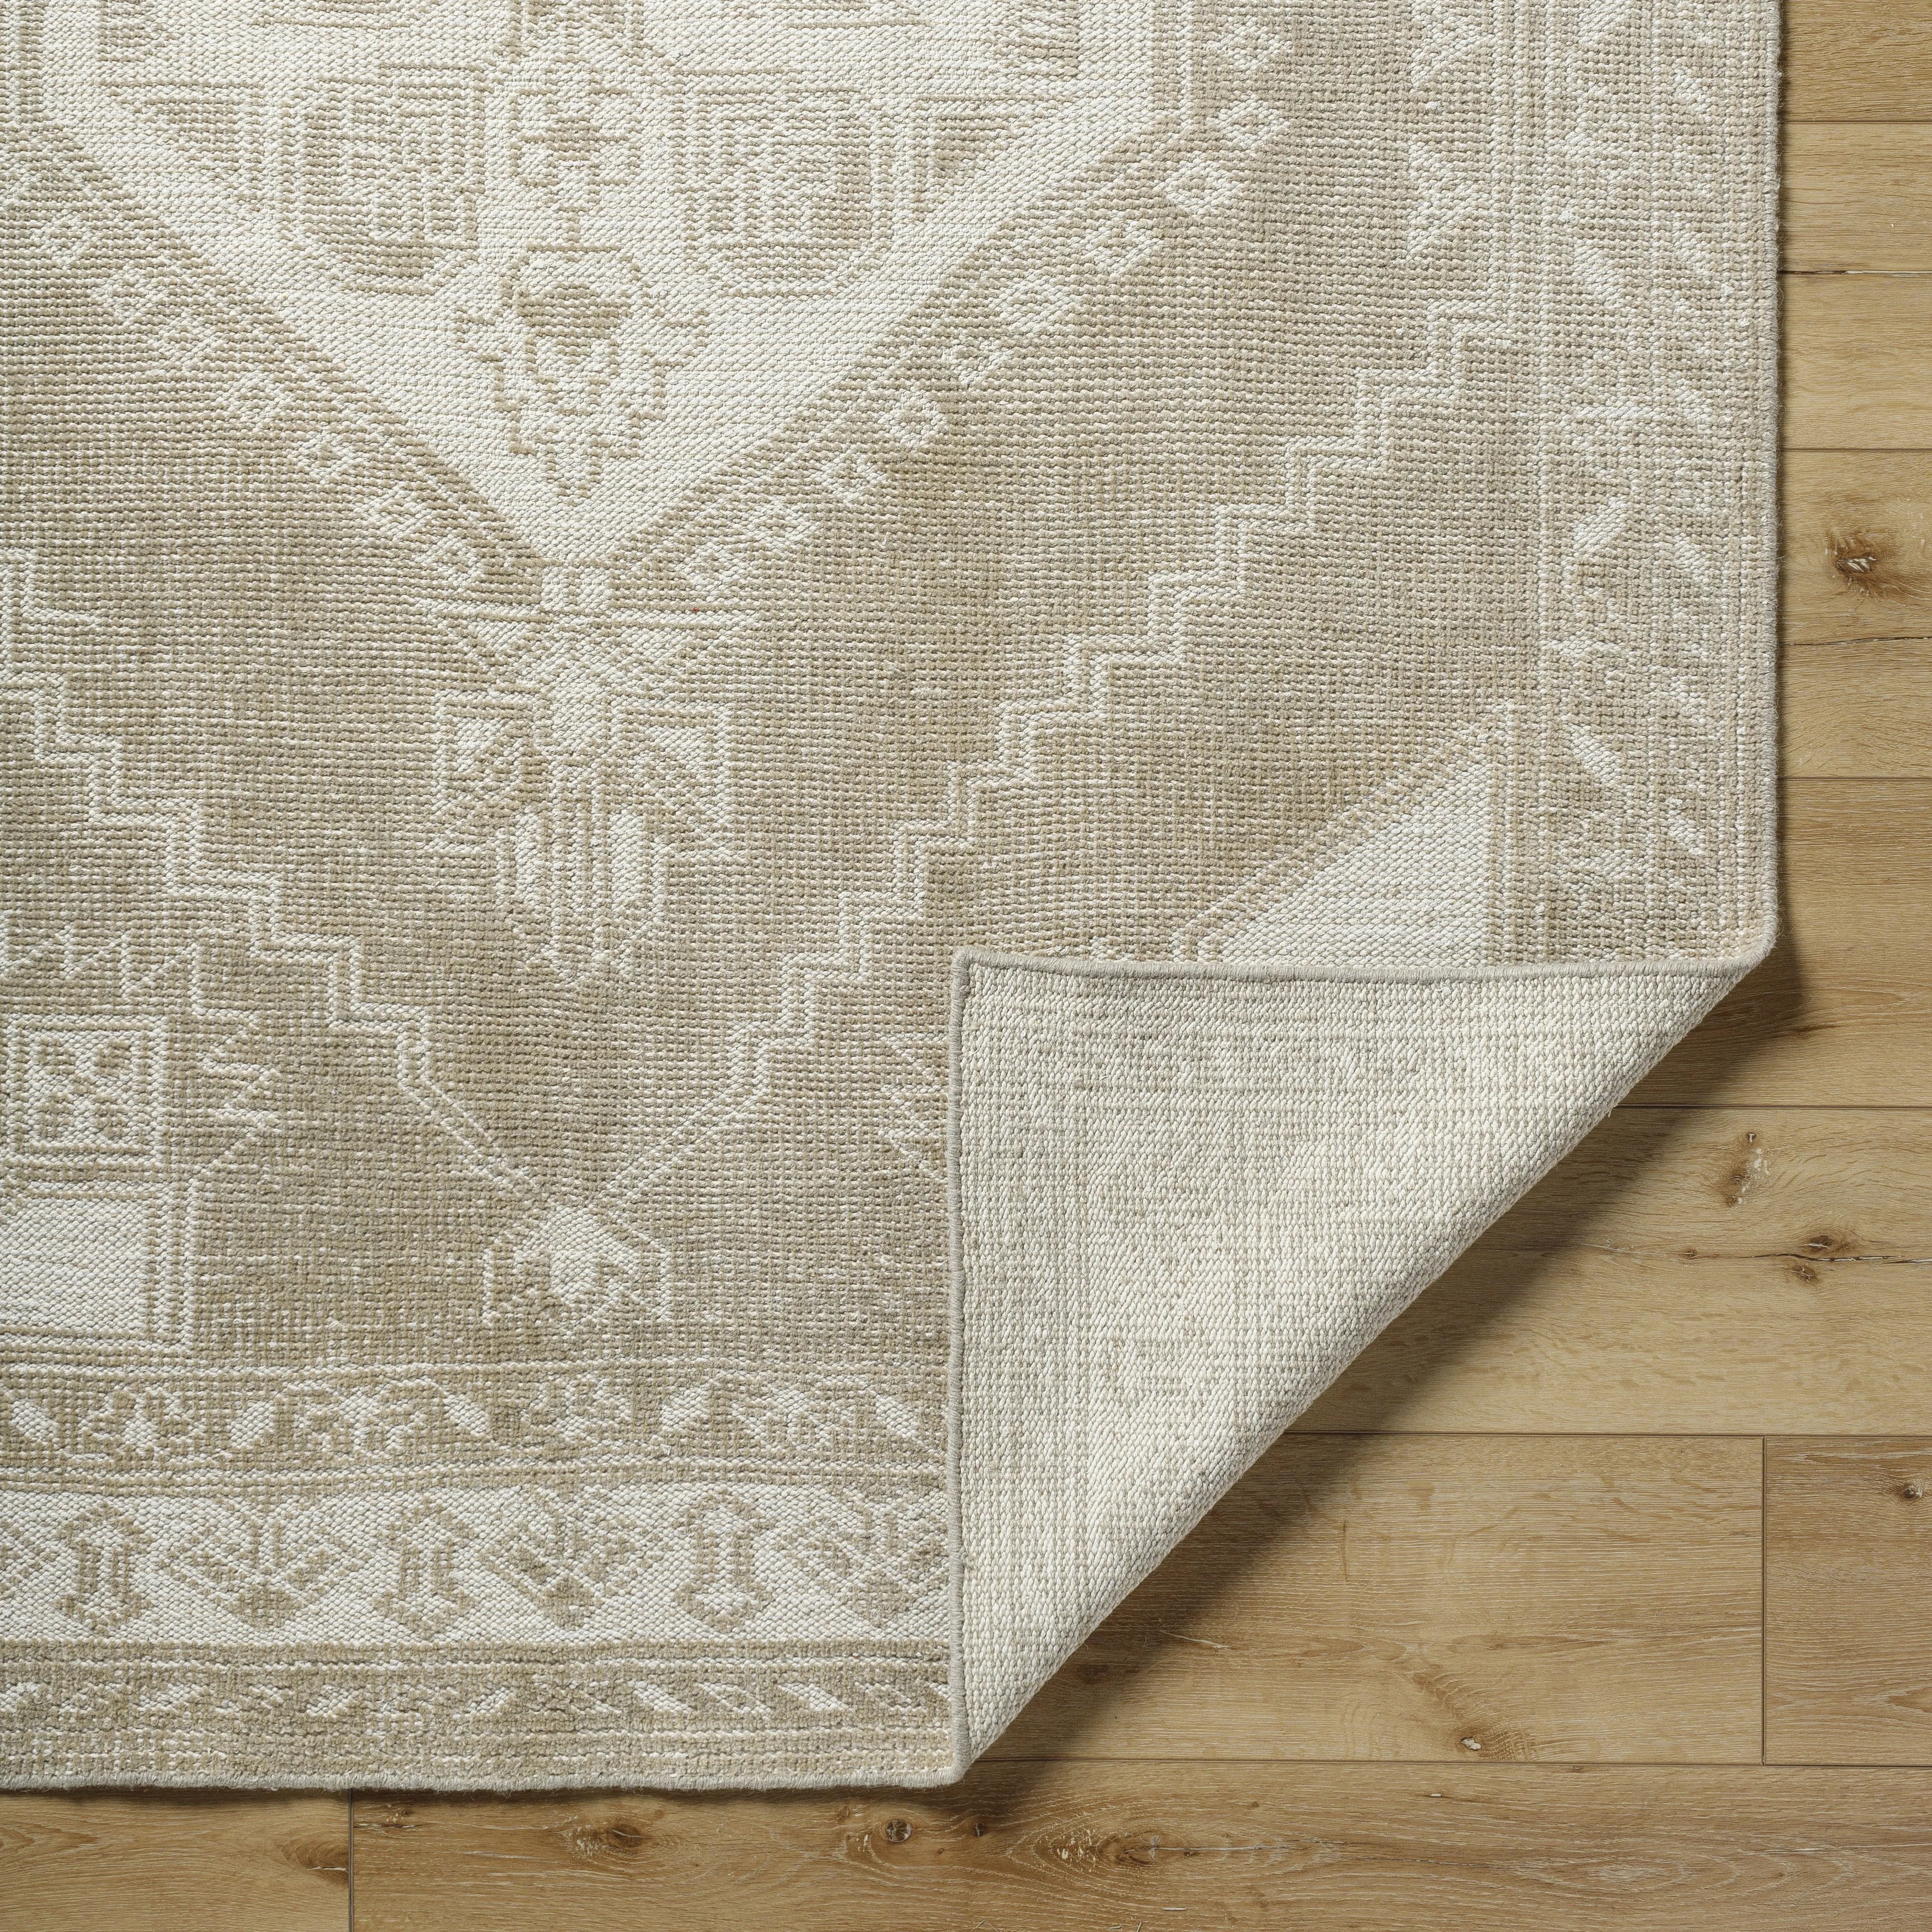 The Zahra Collection showcases traditional inspired designs that exemplify timeless styles of elegance, comfort, and sophistication. Amethyst Home provides interior design, new home construction design consulting, vintage area rugs, and lighting in the Kansas City metro area.